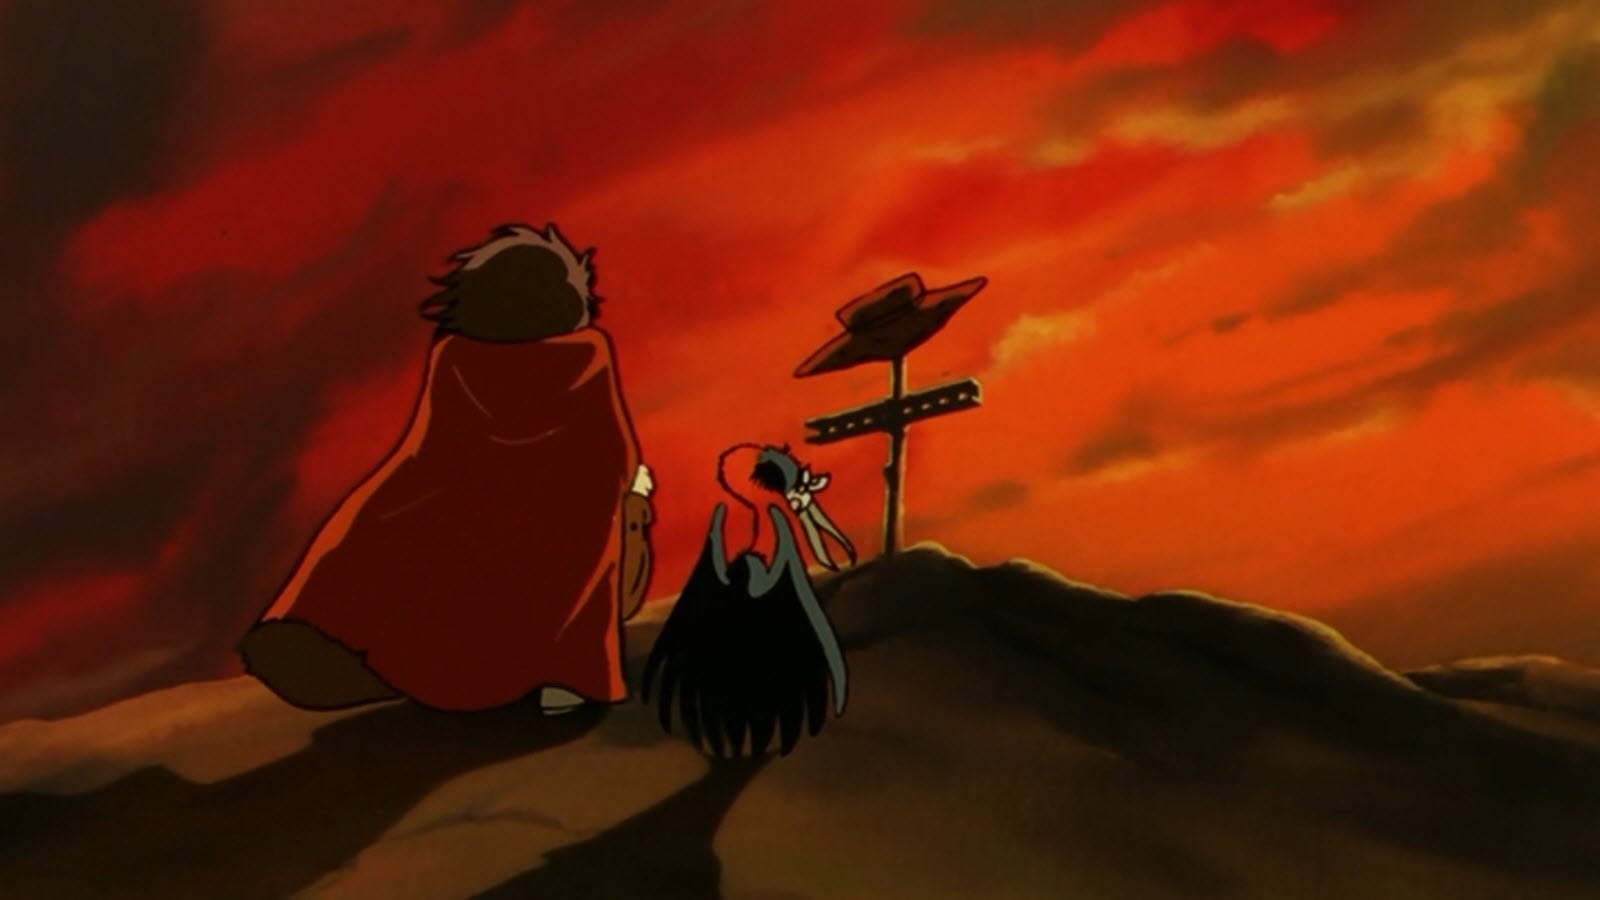 Galaxy Express 999  characters and grave